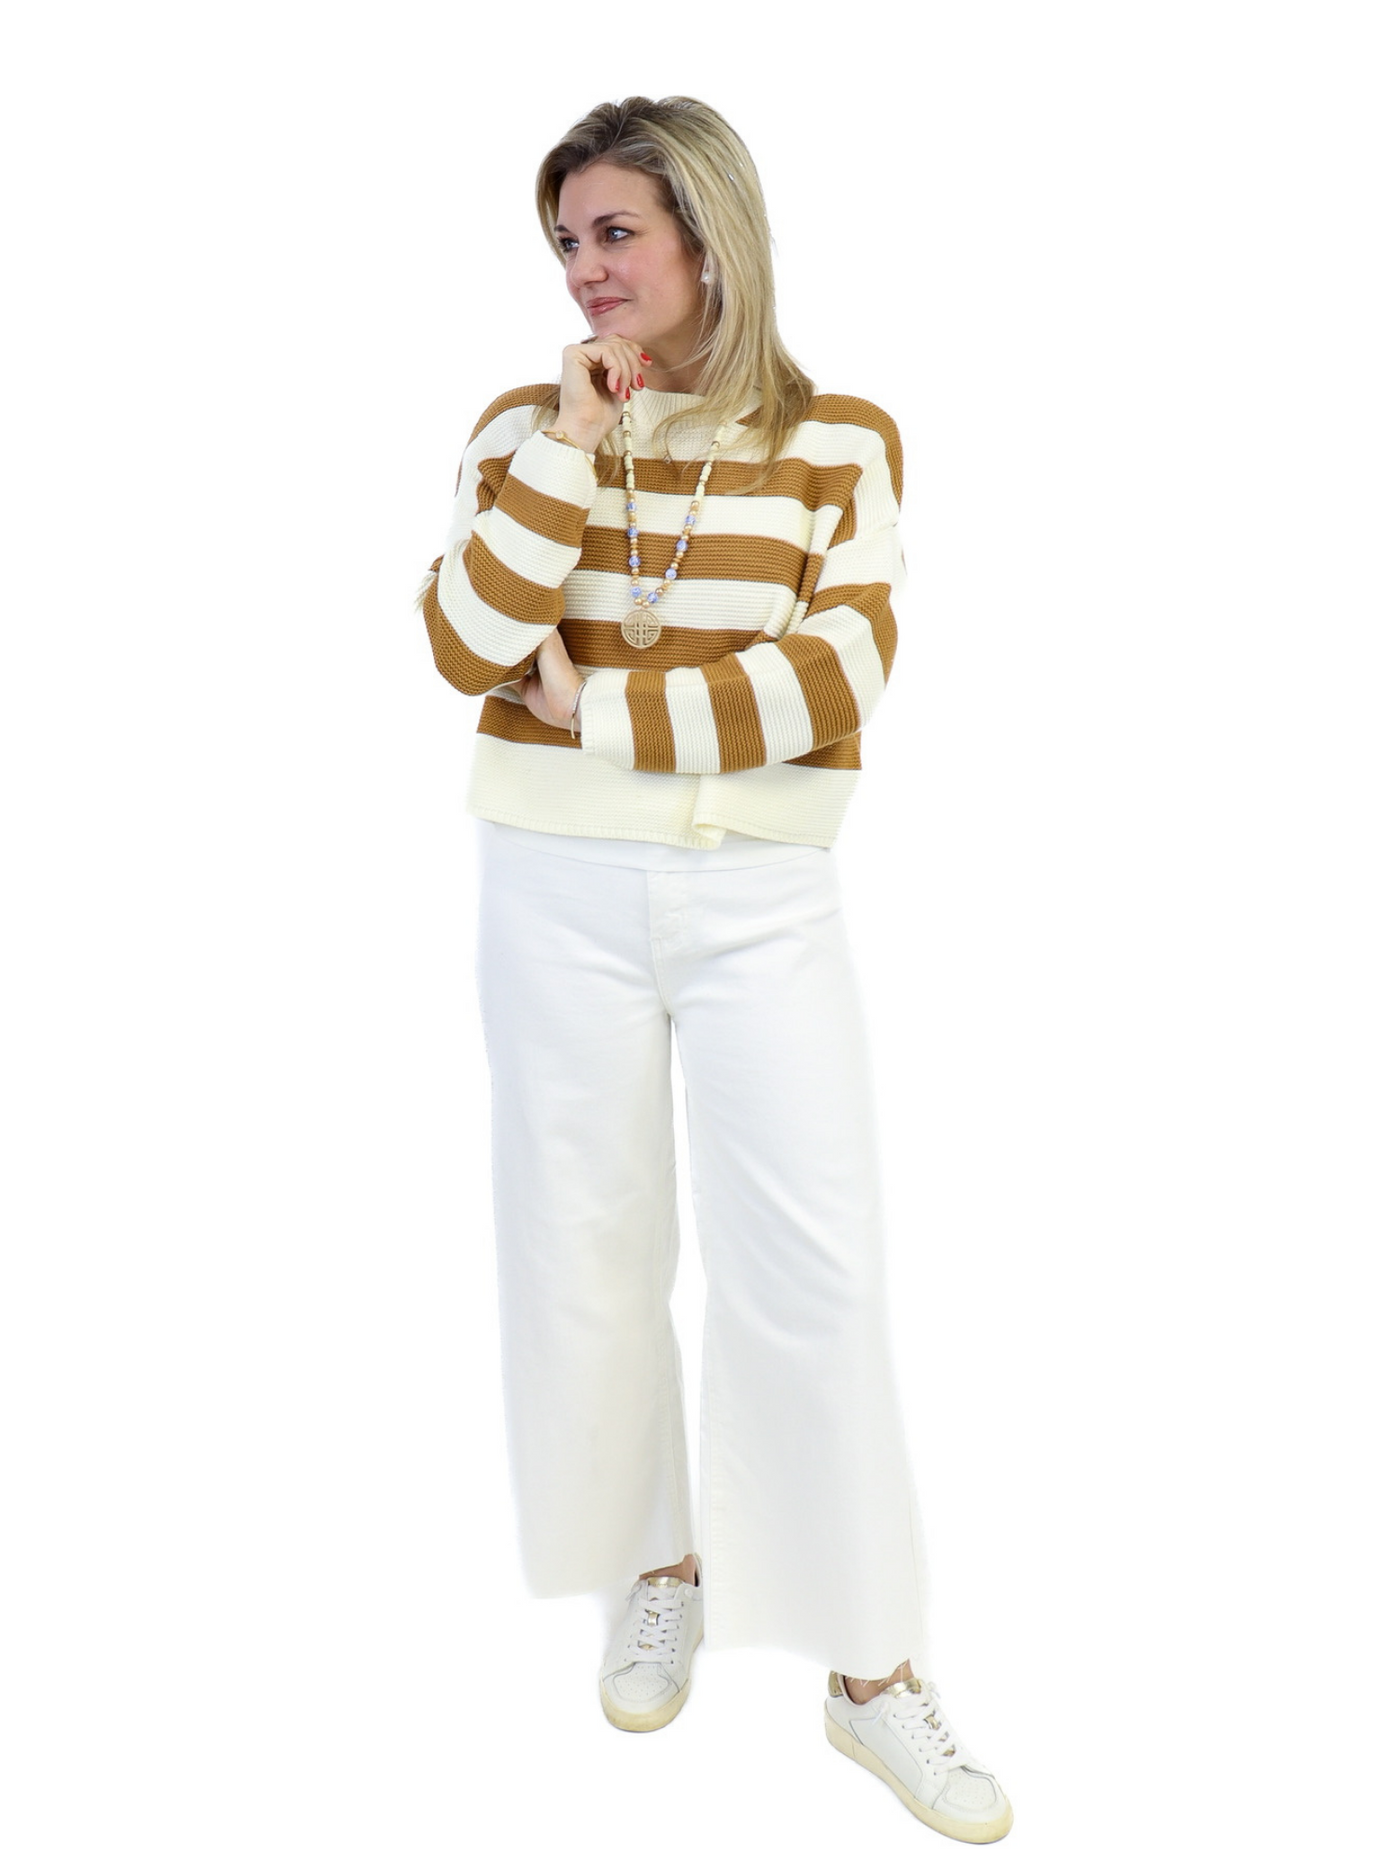 Stripe Knit Sweater - Toffee front view with white wide leg jeans.